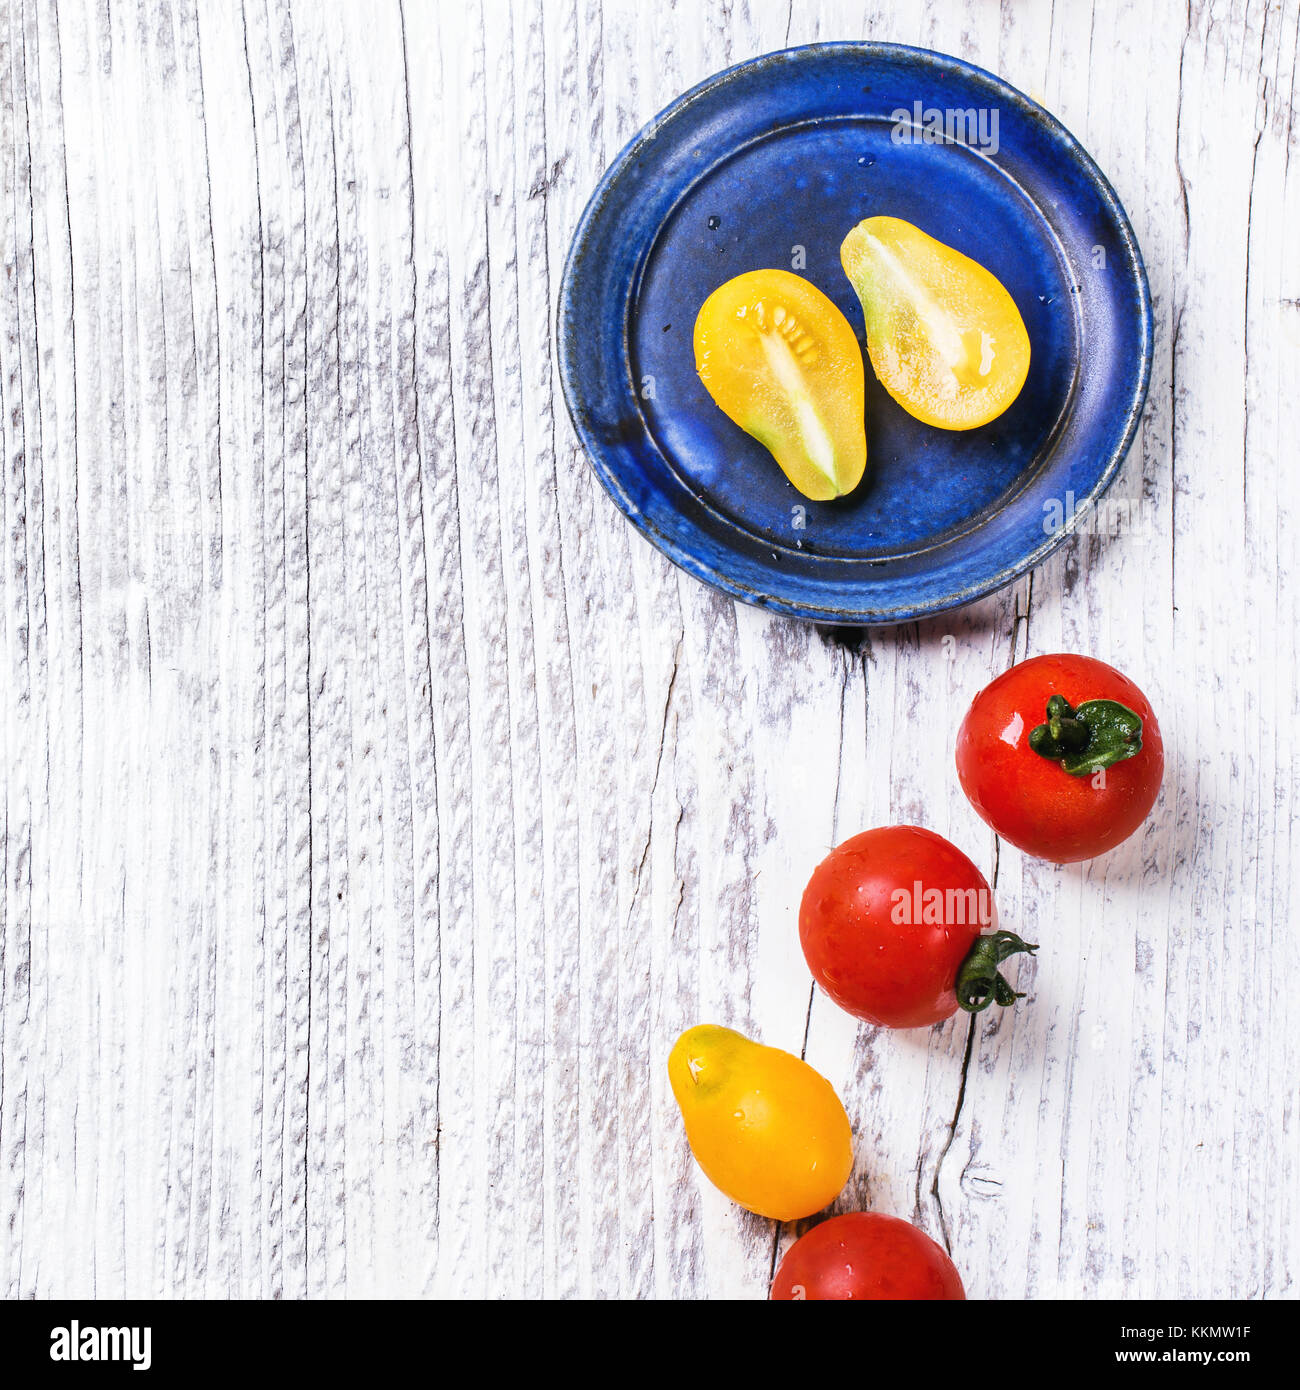 Blue ceramic plate with mix of red and yellow cherry tomatoes over white wooden table. Top view. Square image Stock Photo